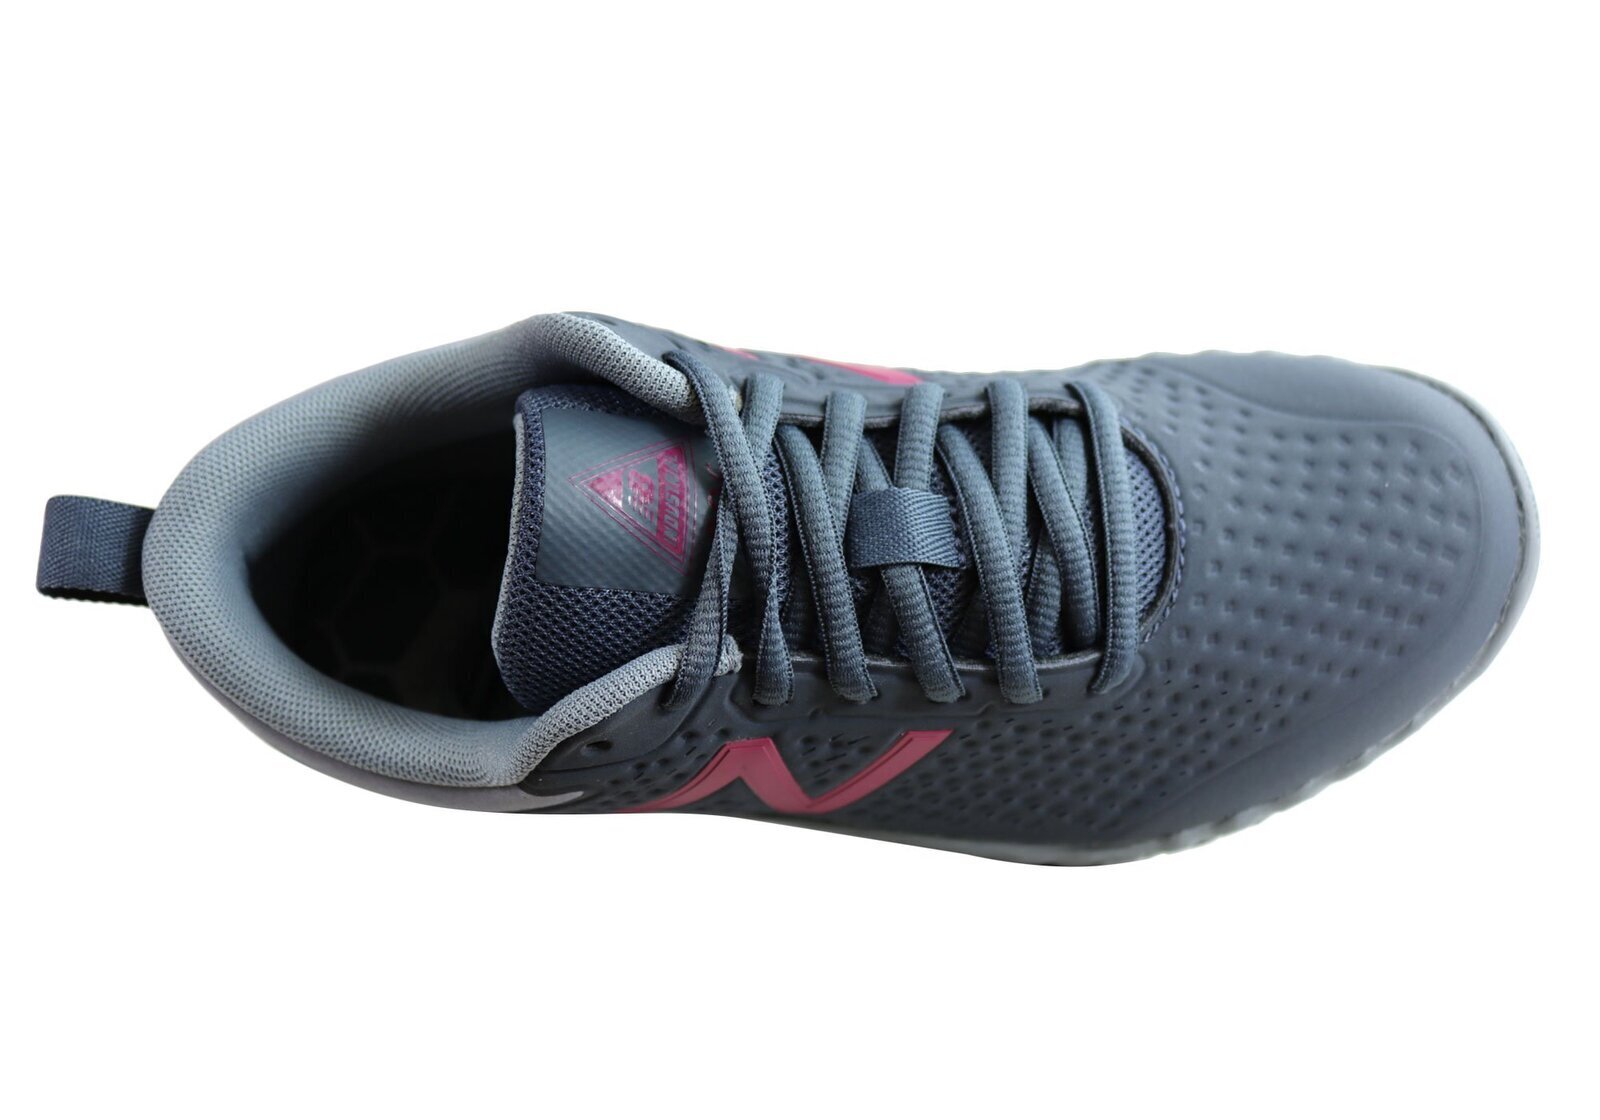 New Balance Womens 806 Wide Fit Slip Resistant Work Shoes - Grey/Berry - US 6